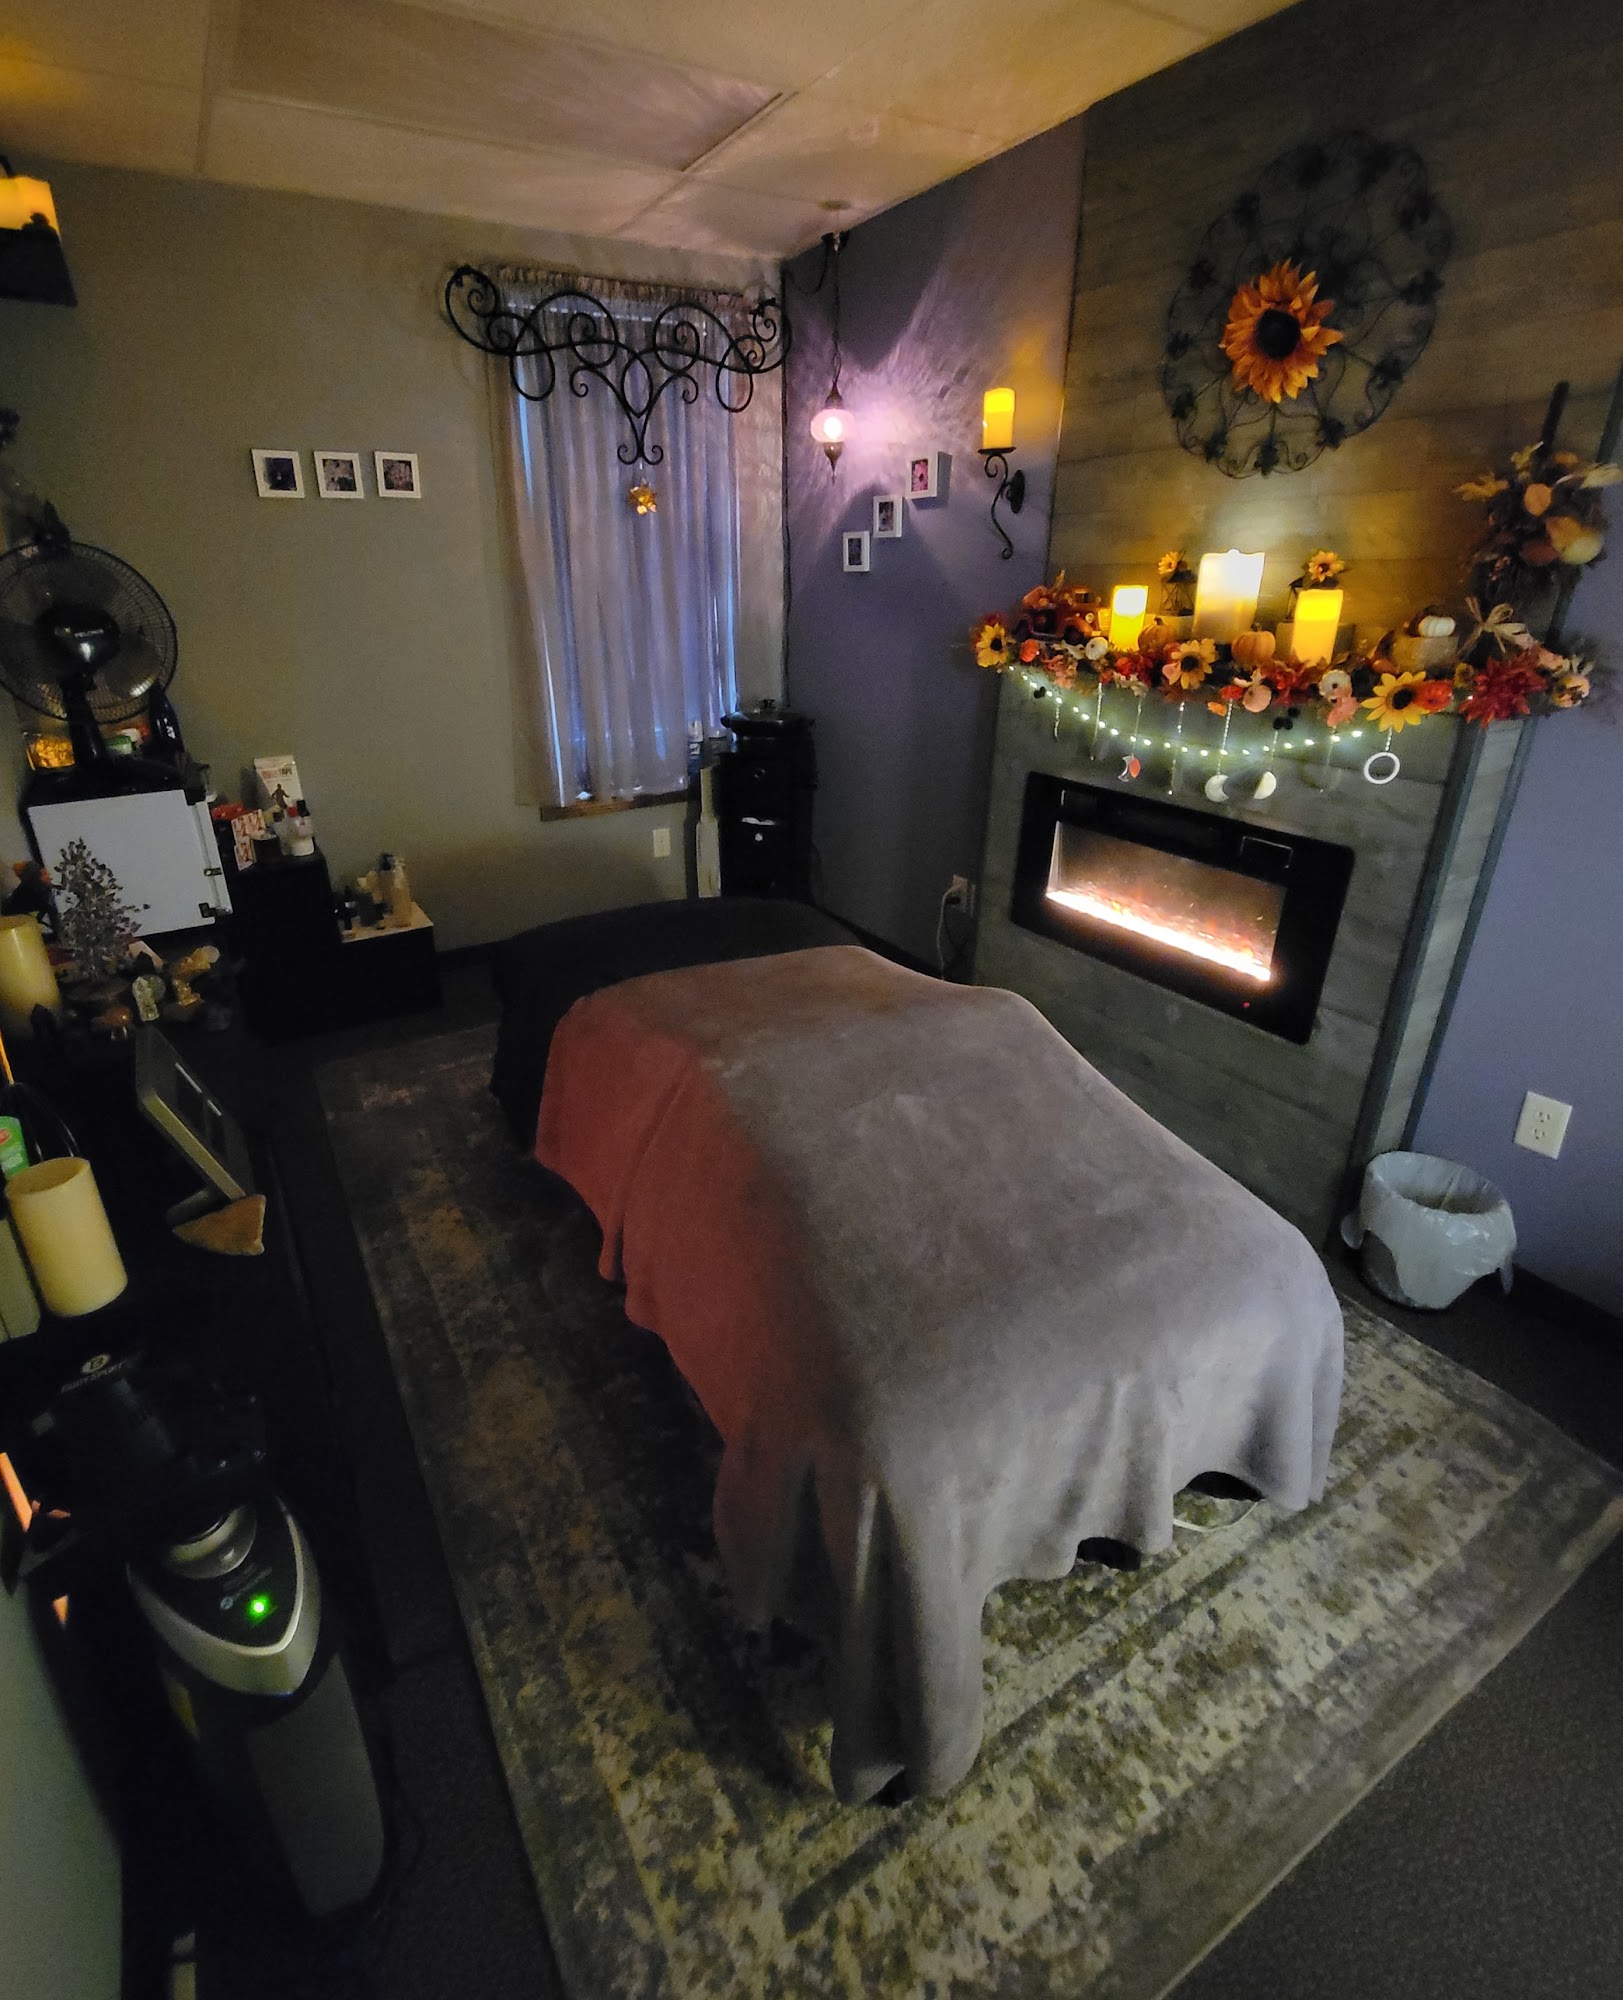 Relaxation and Therapeutic Massage by Rae Ann Wilkosz 31 Main St, Oakfield New York 14125